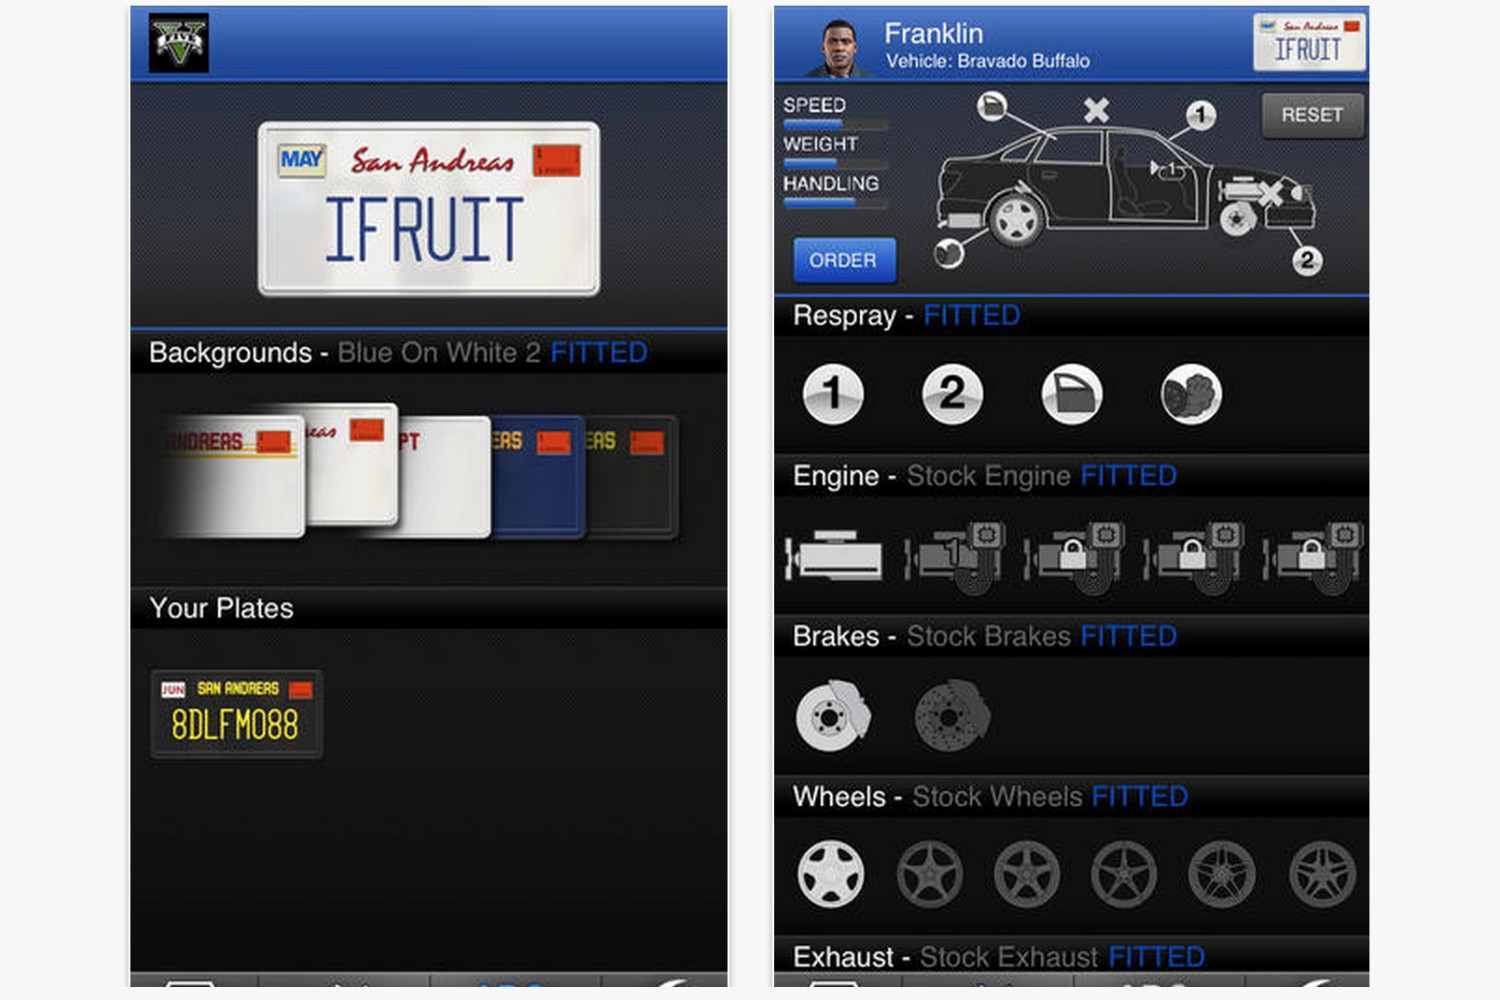 How To Download iFruit App In GTA 5 On PS3